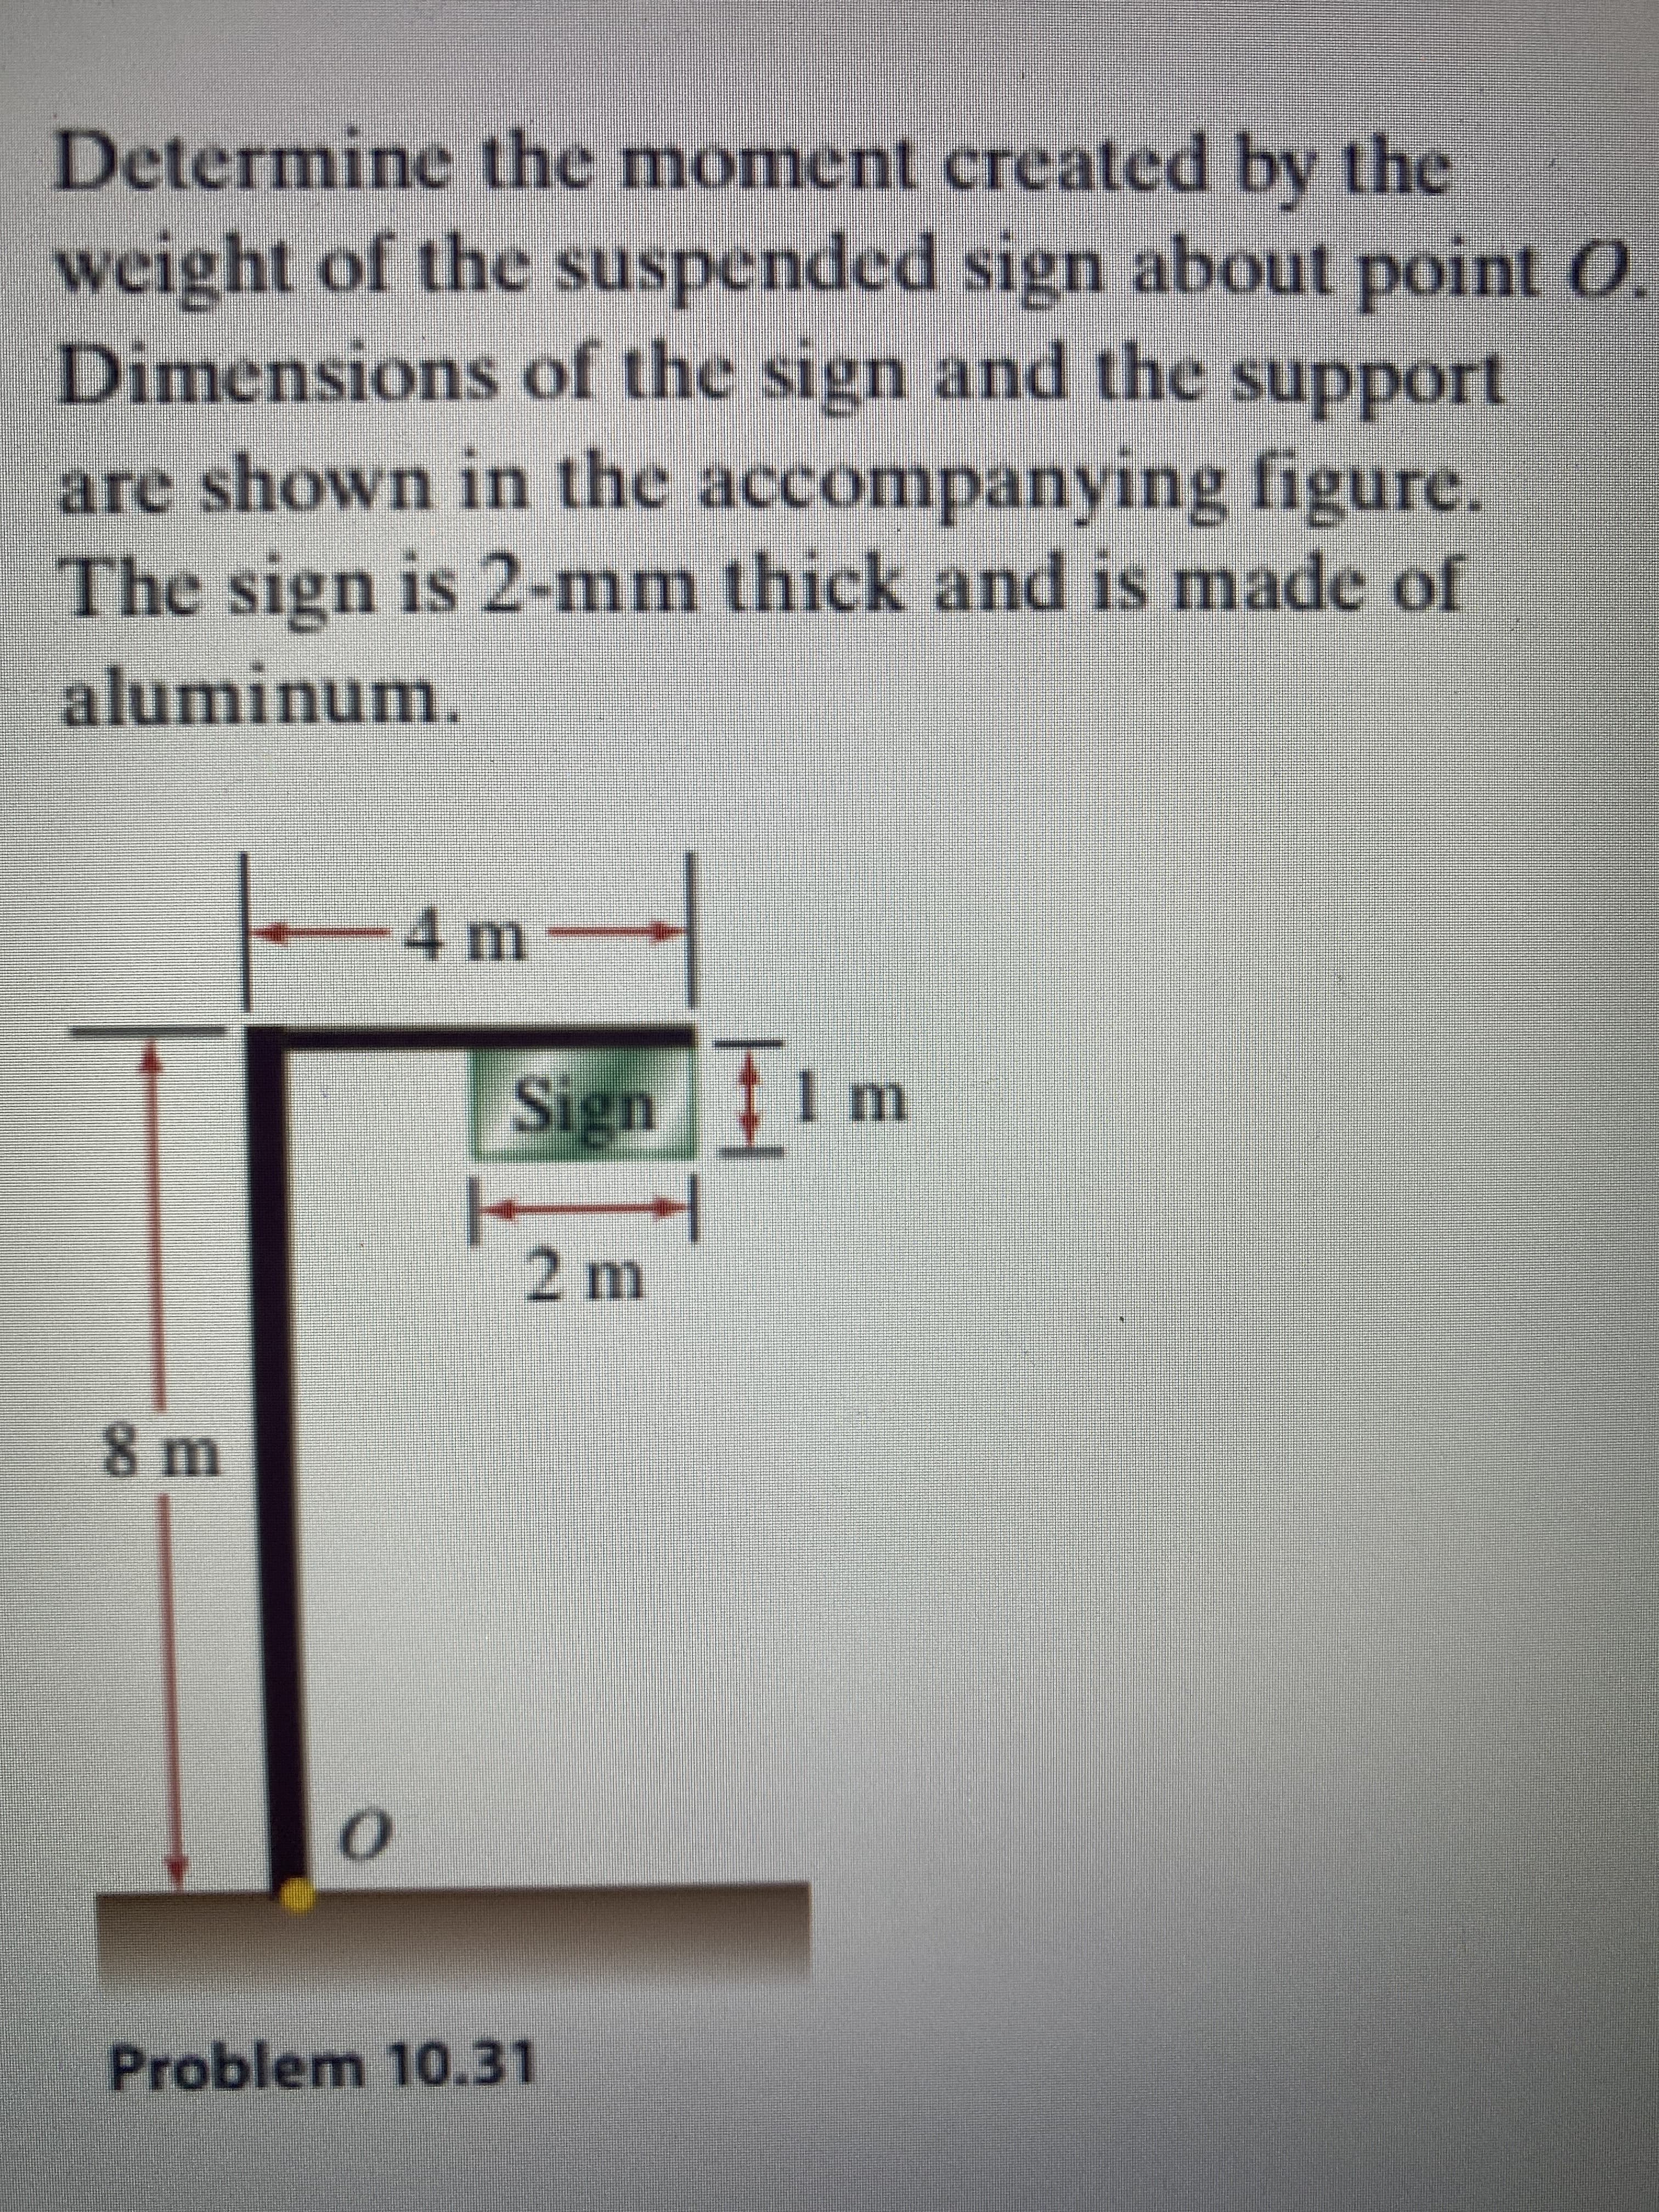 Determine the moment created by the
weight of the suspended sign about point 0.
Dimensions of the sign and the support
are shown in the accompanying figure.
The sign is 2-mm thick and is made of
aluminum.
Problem 10.31
